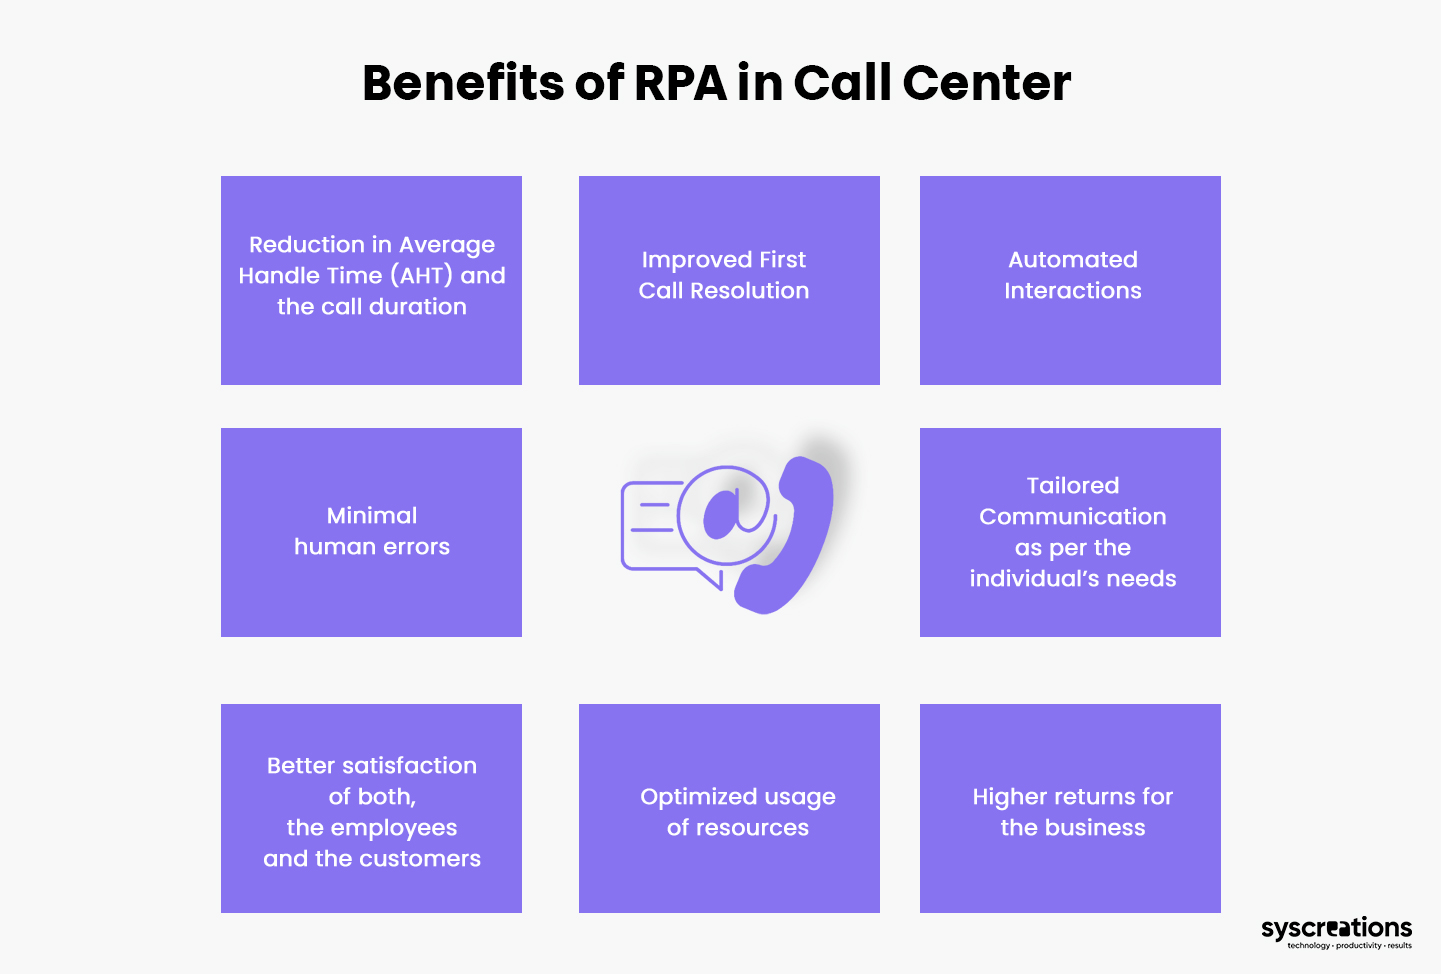 RPA in call center